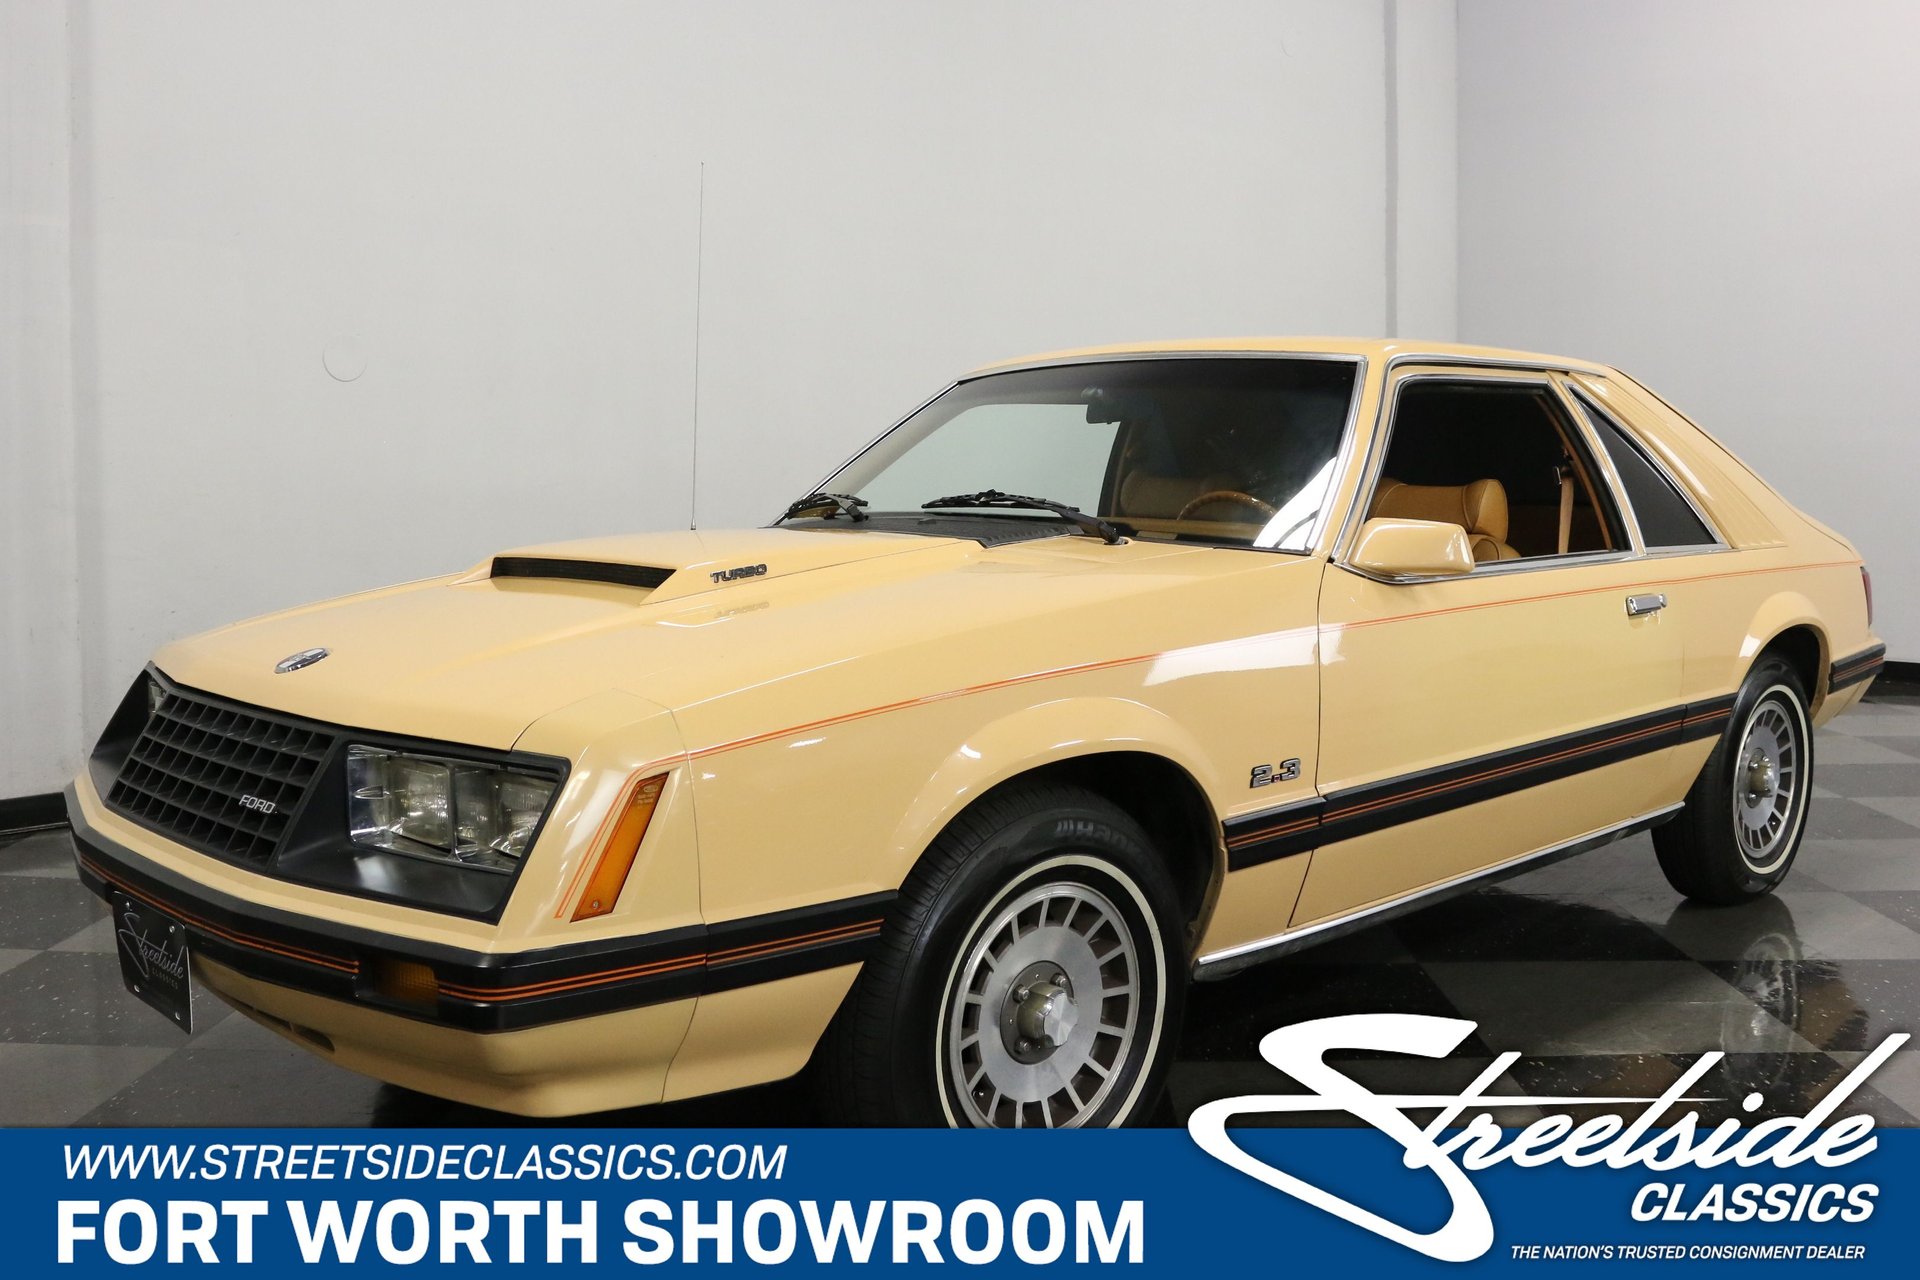 1979 Ford Mustang | Classic Cars for Sale - Streetside Classics